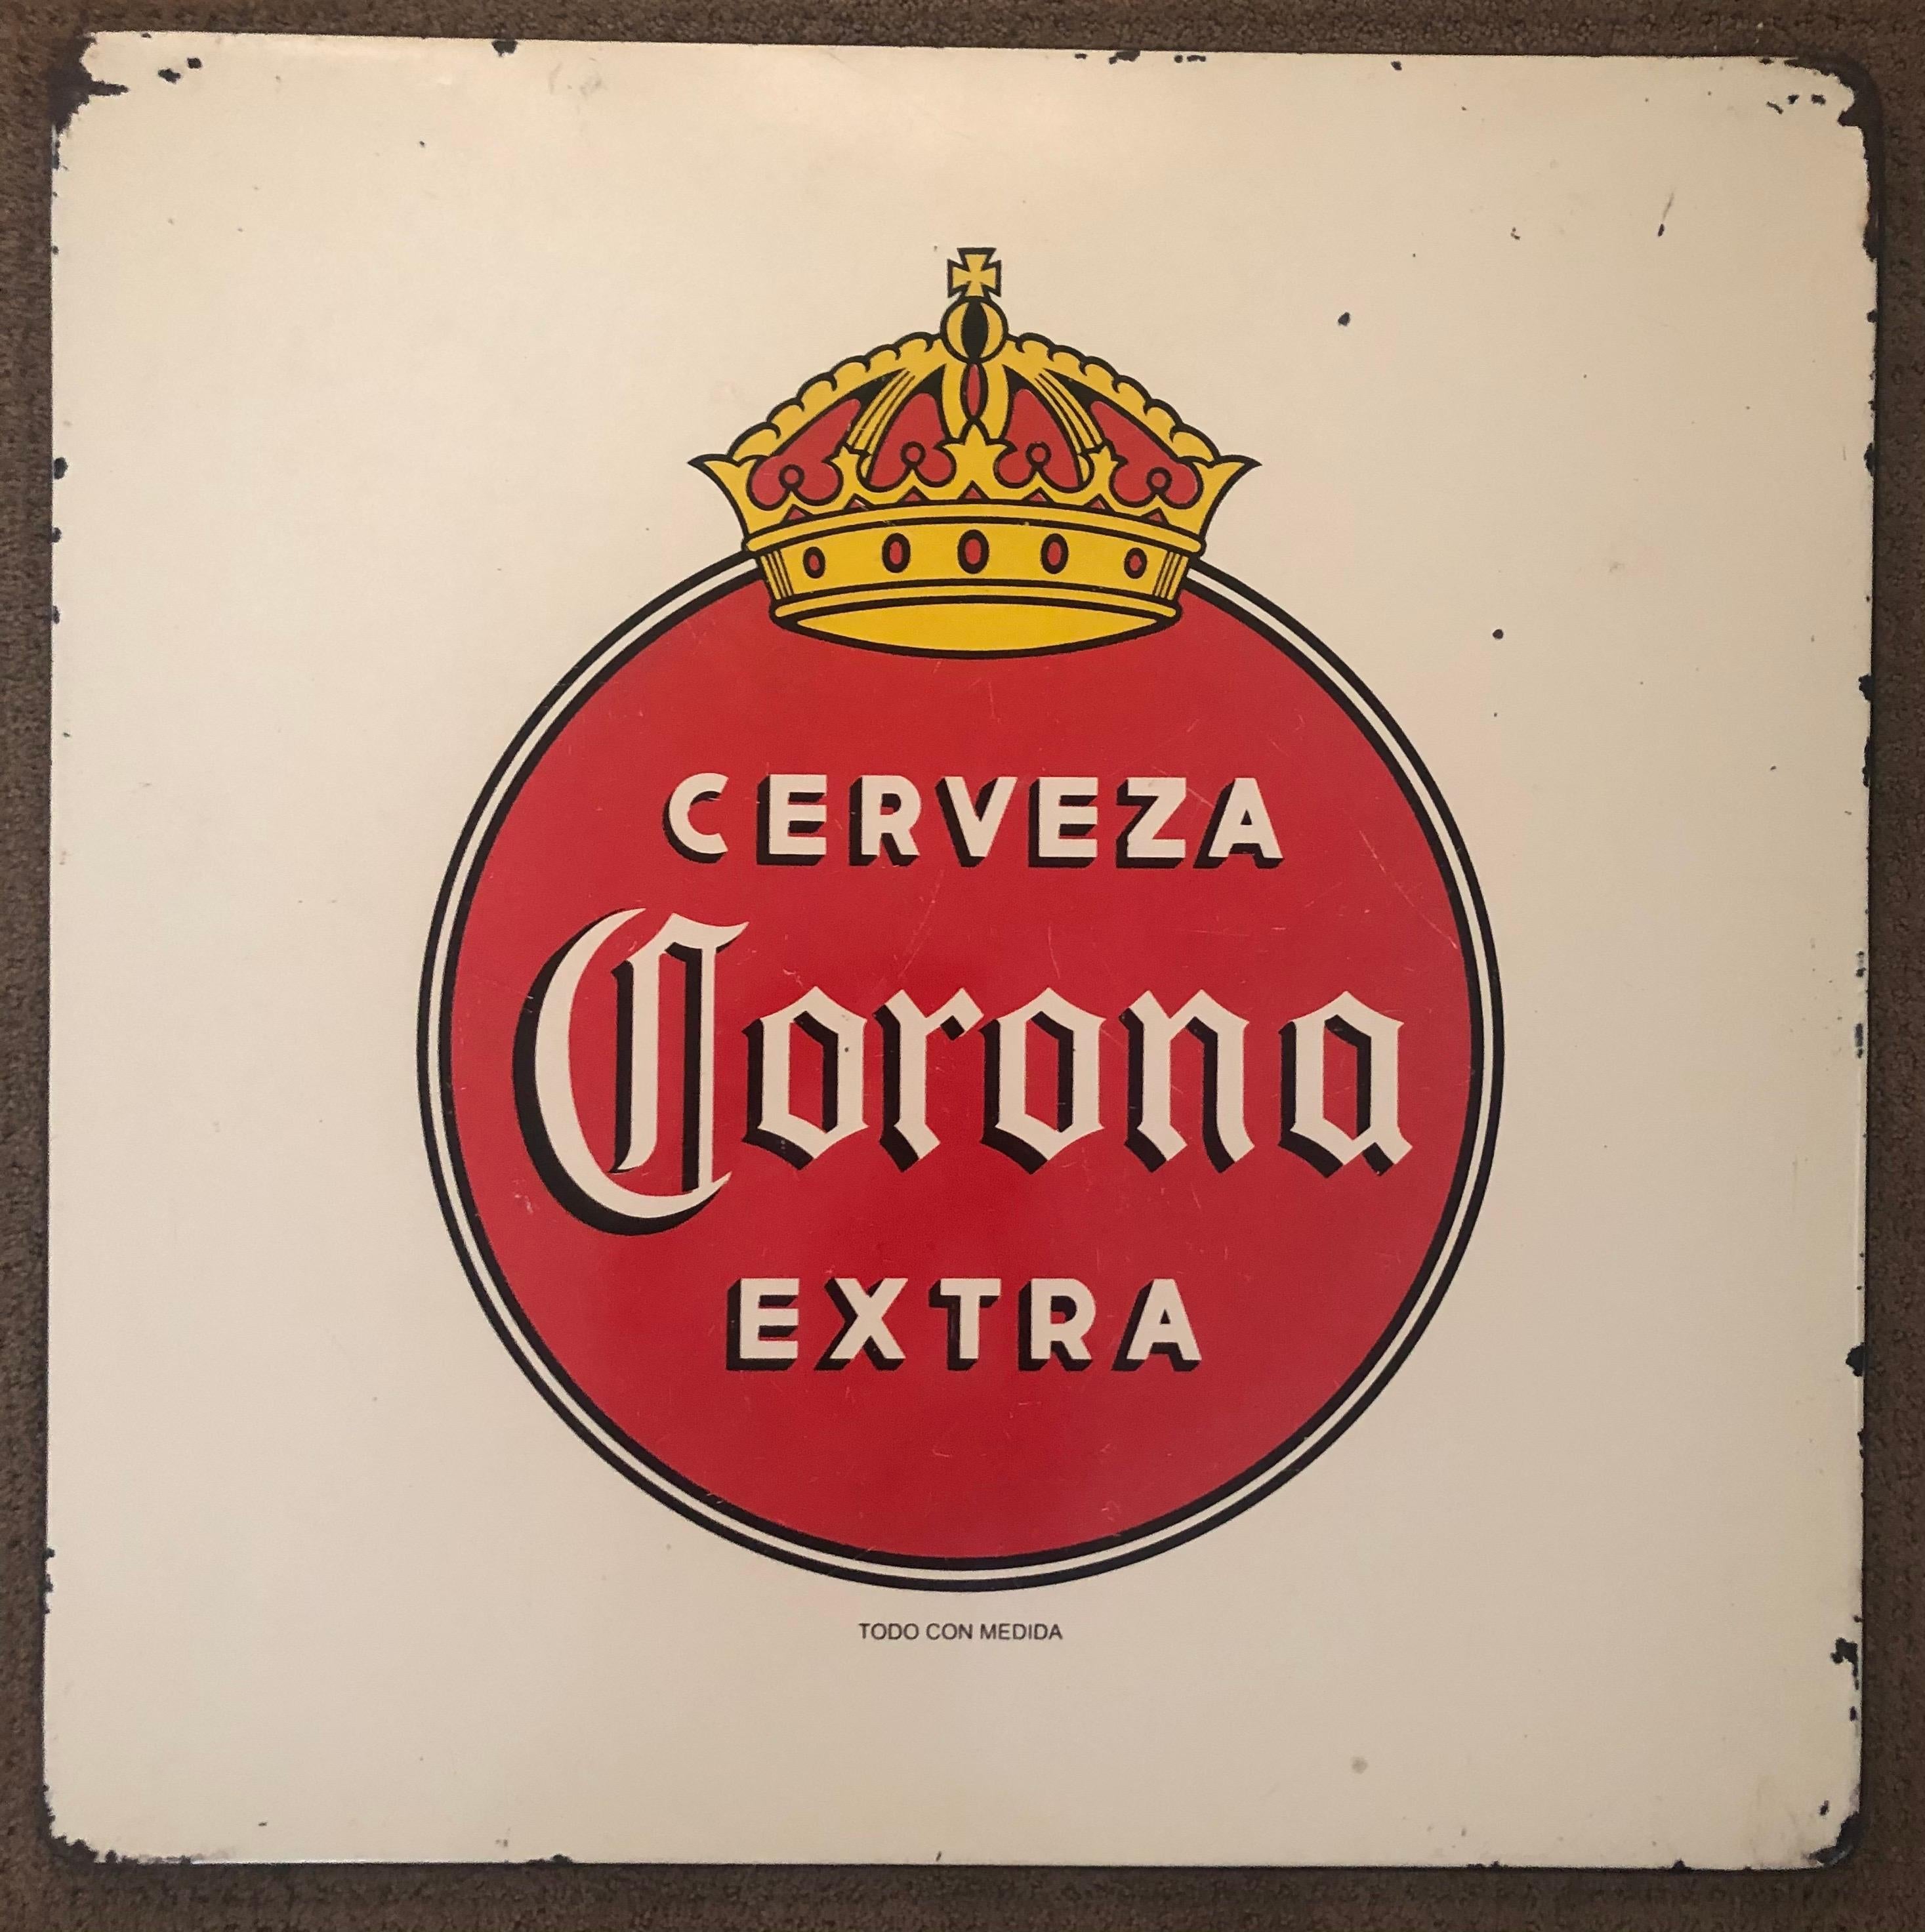 Super cool and hard to find vintage porcelain Corona beer sign, circa 1970s. The sign is actually a former tabletop at a roadside cantina in Mexico. The distressed look and vintage patina make this piece a great addition to any bar or game room! The